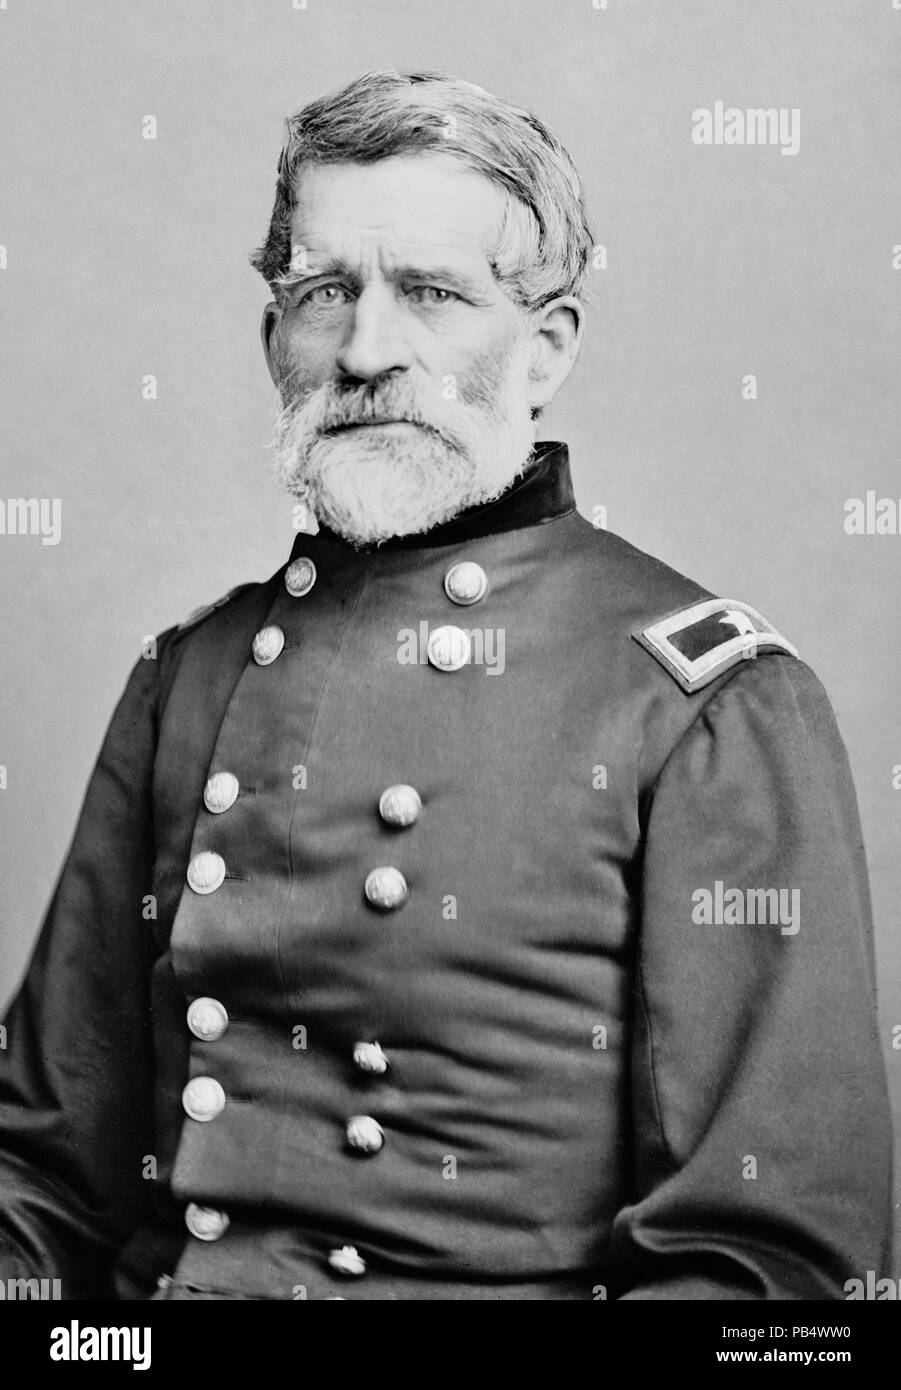 . English: Lysander Cutler (February 16, 1807 – July 30, 1866) was a businessman, educator, politician, and a Union Army general during the American Civil War. between 1860 and 1866 976 Lysander Cutler Stock Photo